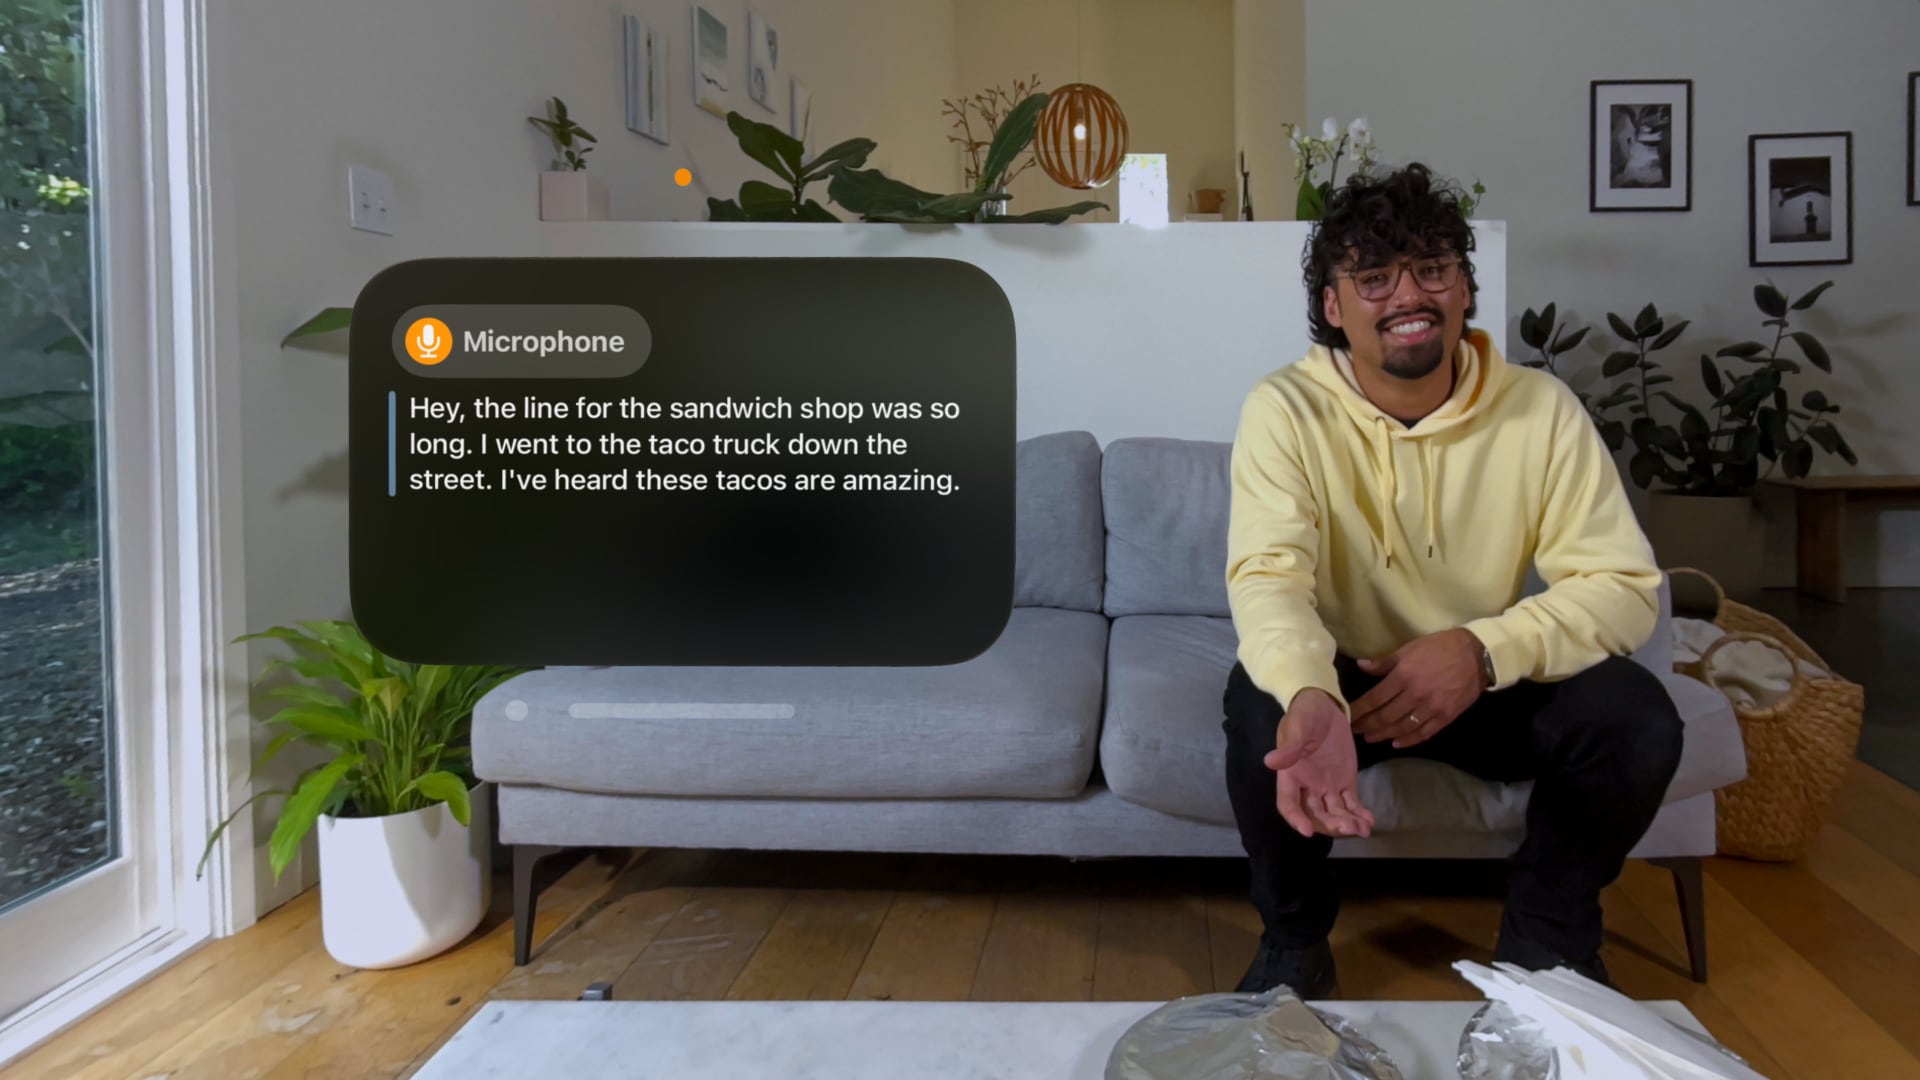 A scene from the Vision Pro headset showing a young man sitting on a couch in a modern apartment, with a live captions bubble showing transcript of their speech in real time